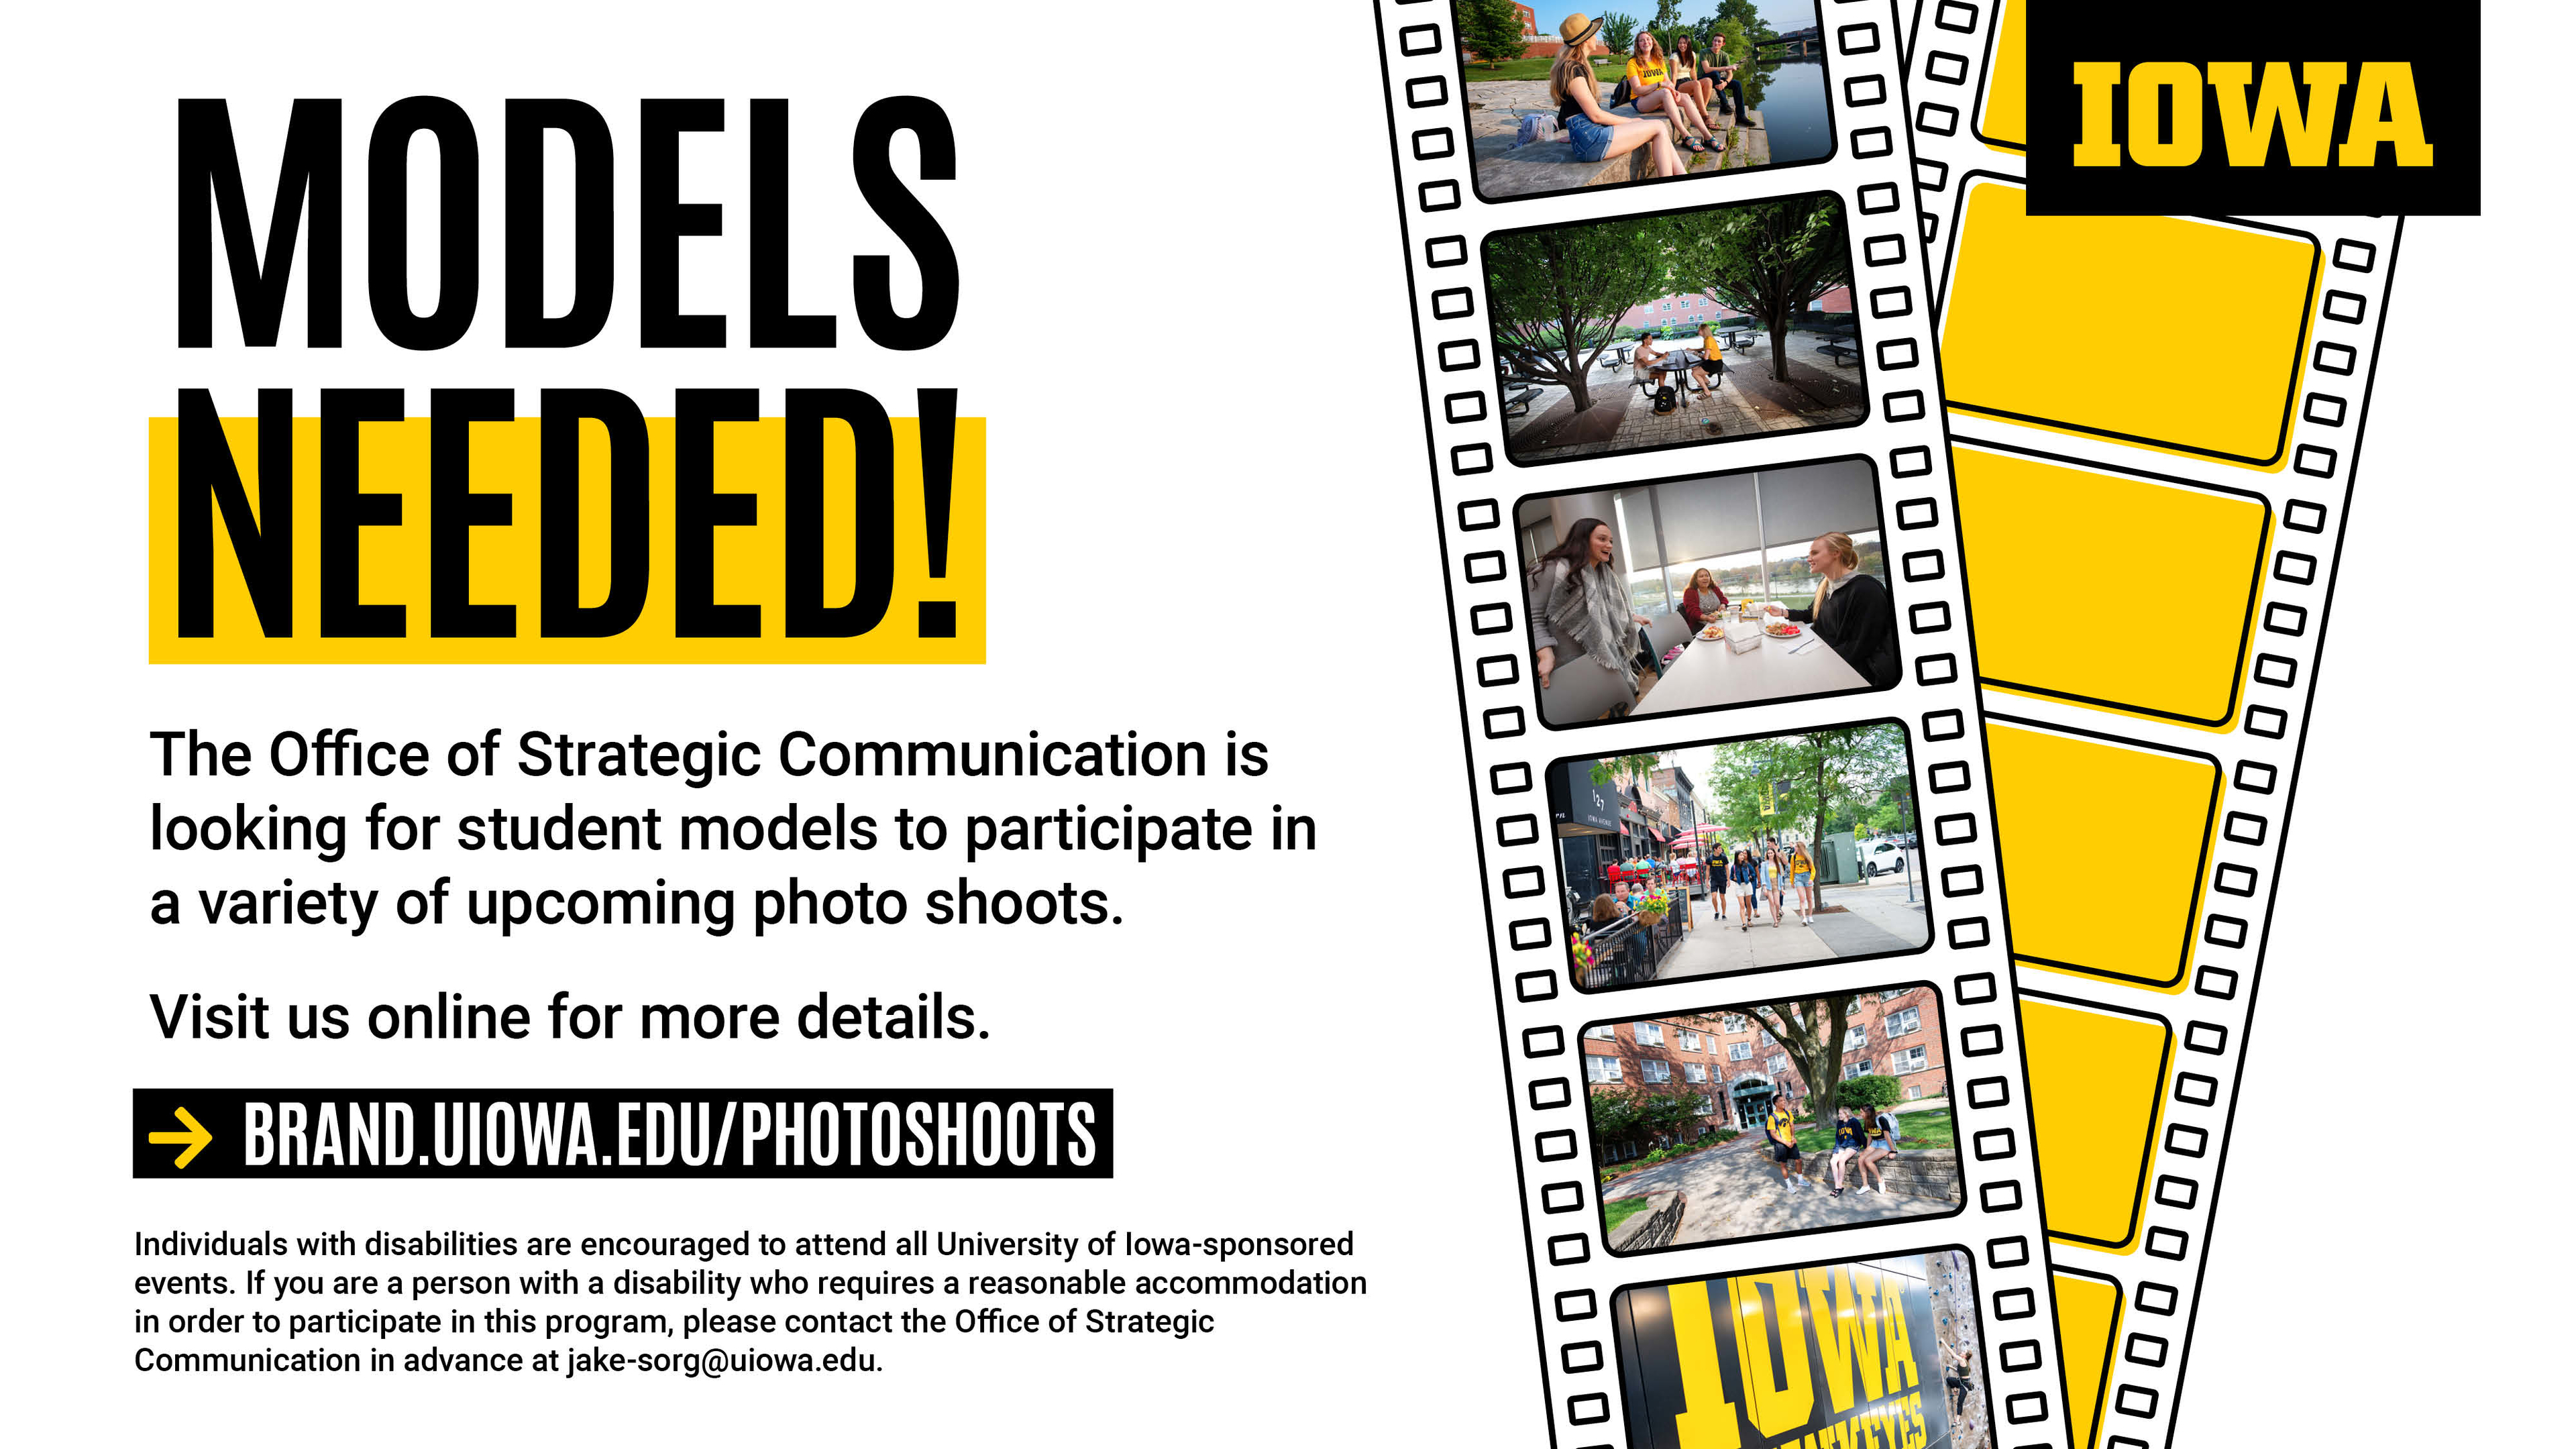 Strategic Communications needs Student Models for upcoming photo shoots.